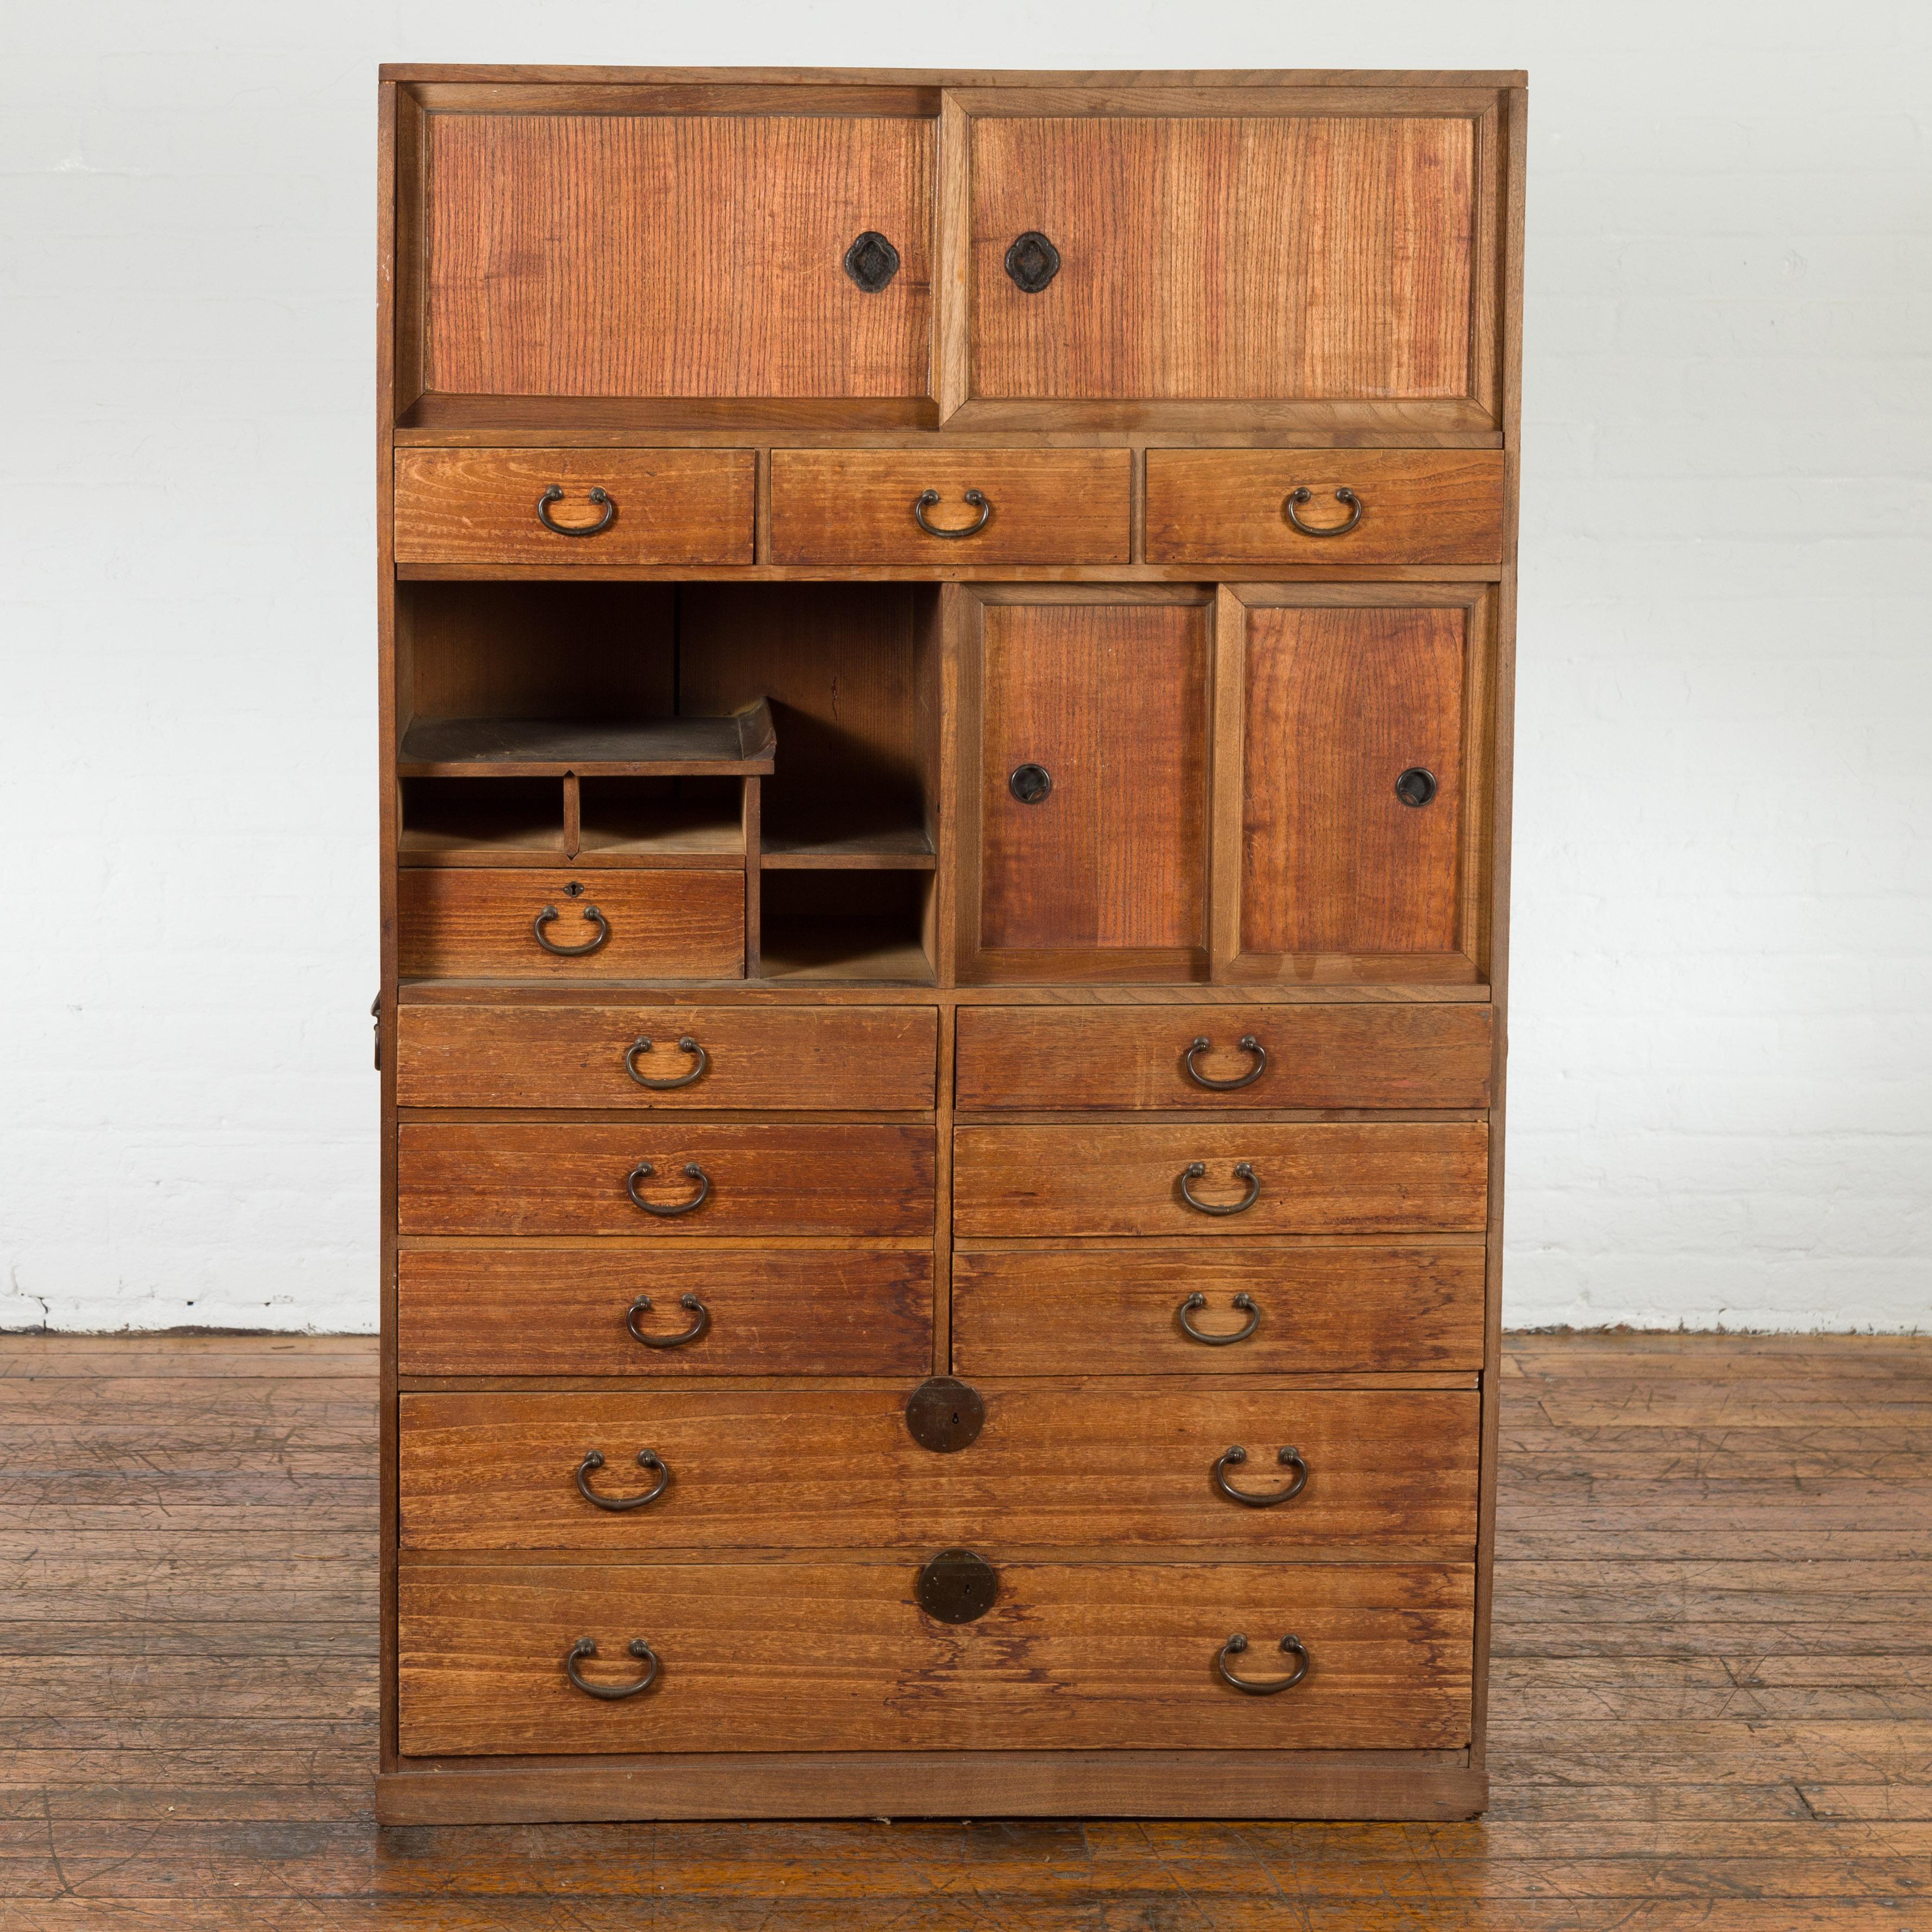 A Japanese Meiji period kiri wood cha tansu tea cabinet from the 19th century, with sliding doors, multiple drawers and brass hardware. Created in Japan during the Meiji period in the 19th century, this tansu chest is made of kiri wood (also known